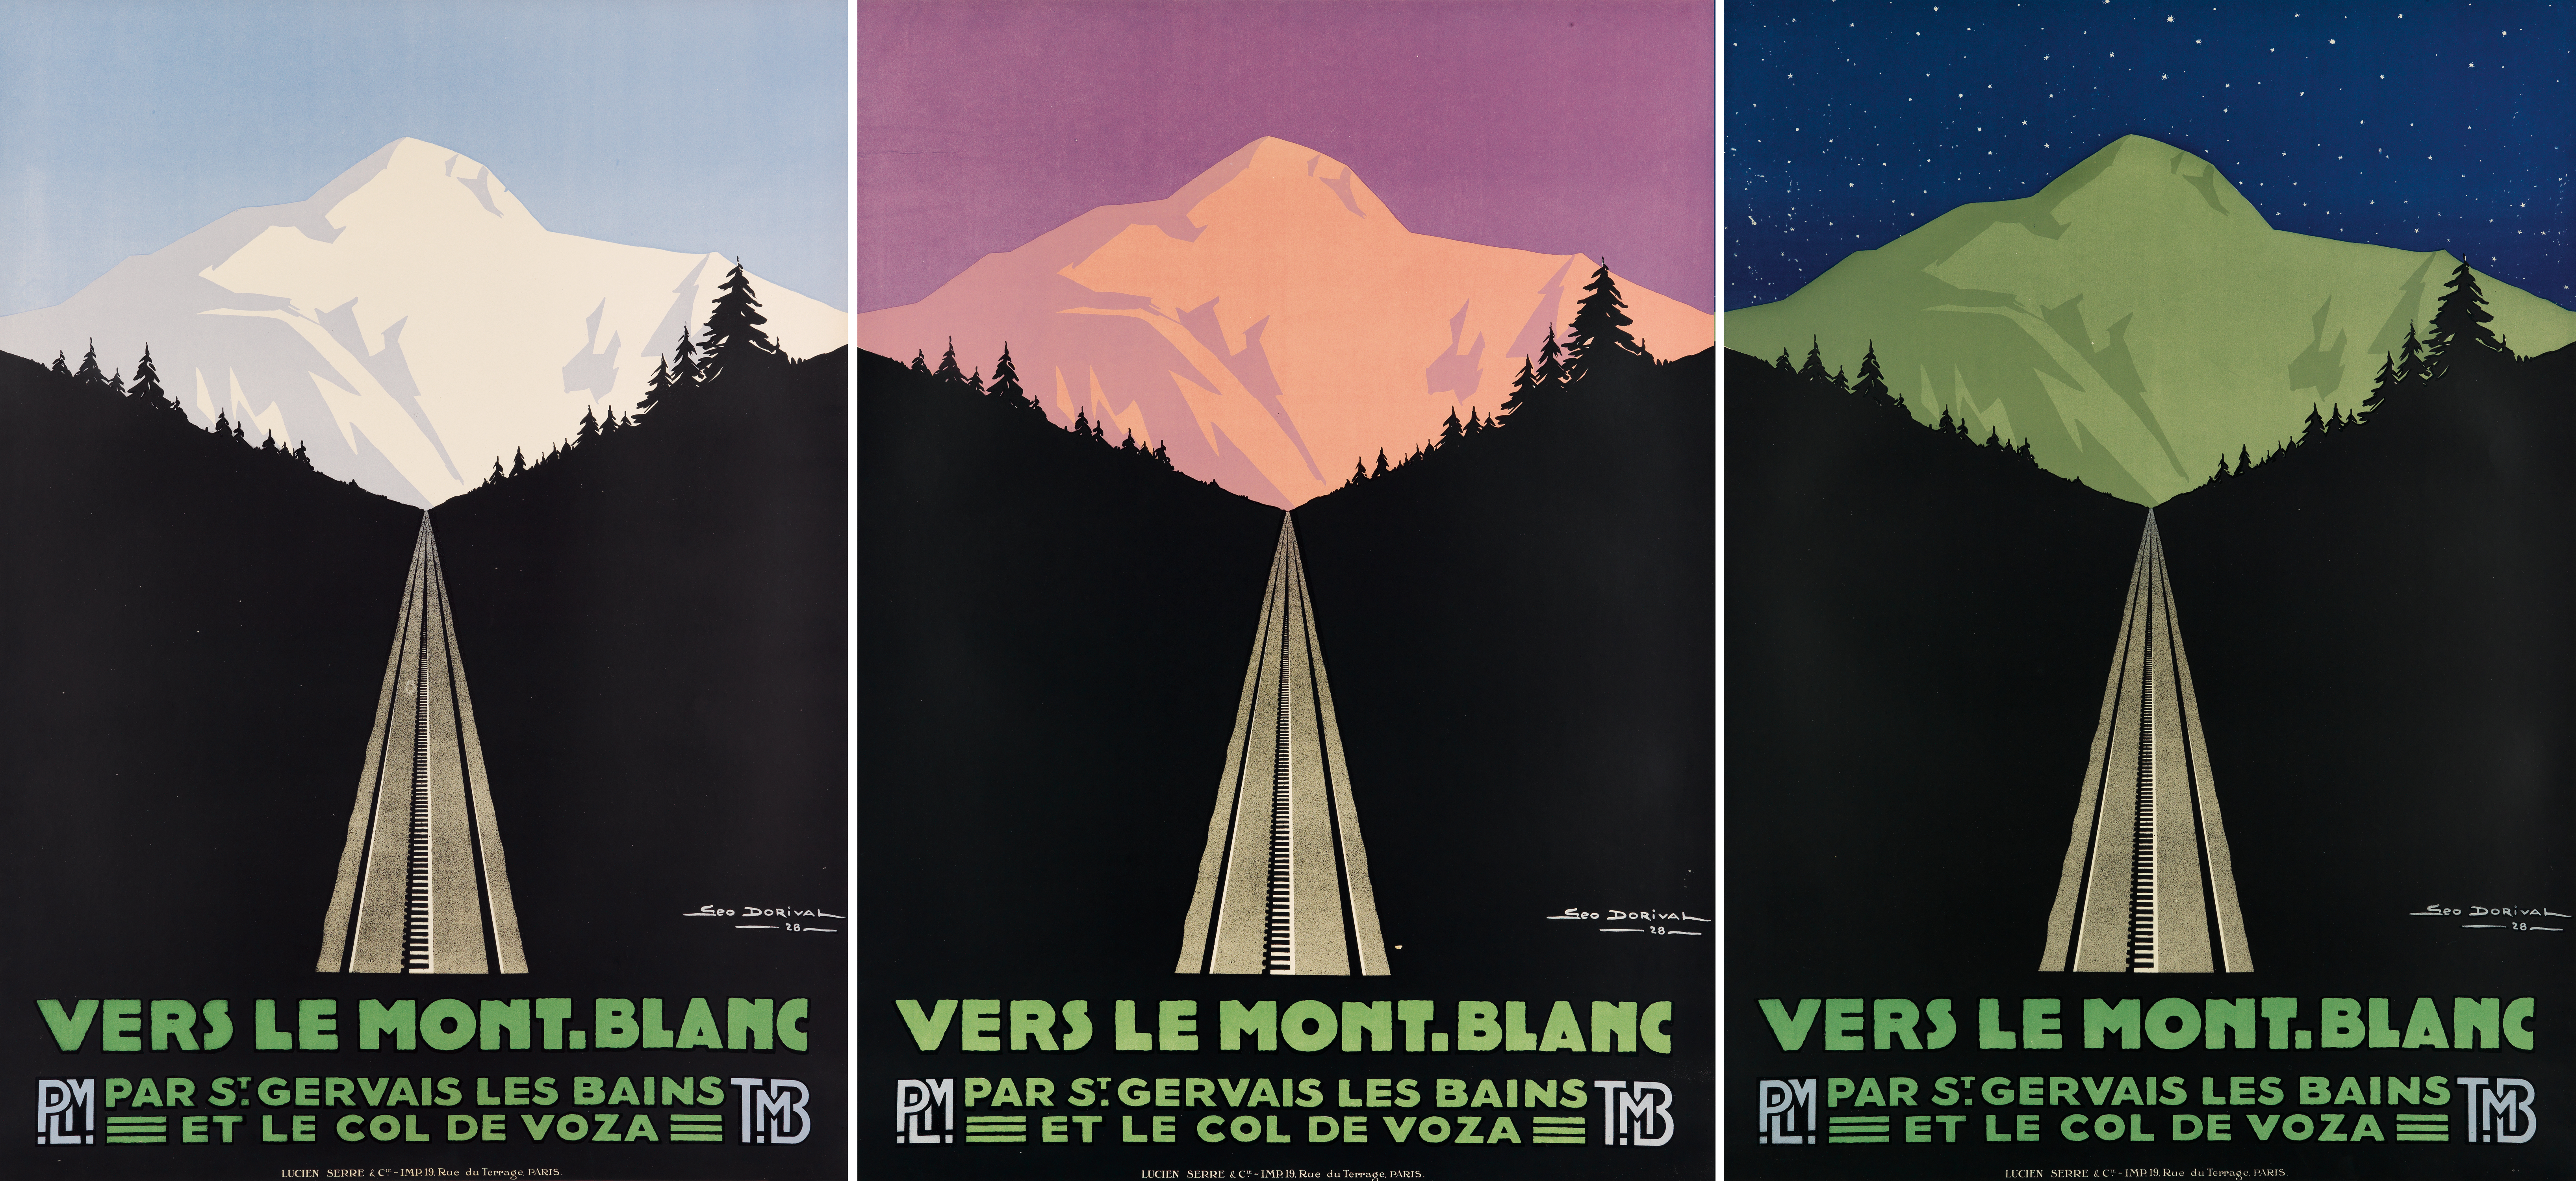 Vers le Mont - Blanc, a group of three posters dating from 1928 and designed by Georges Dorival.